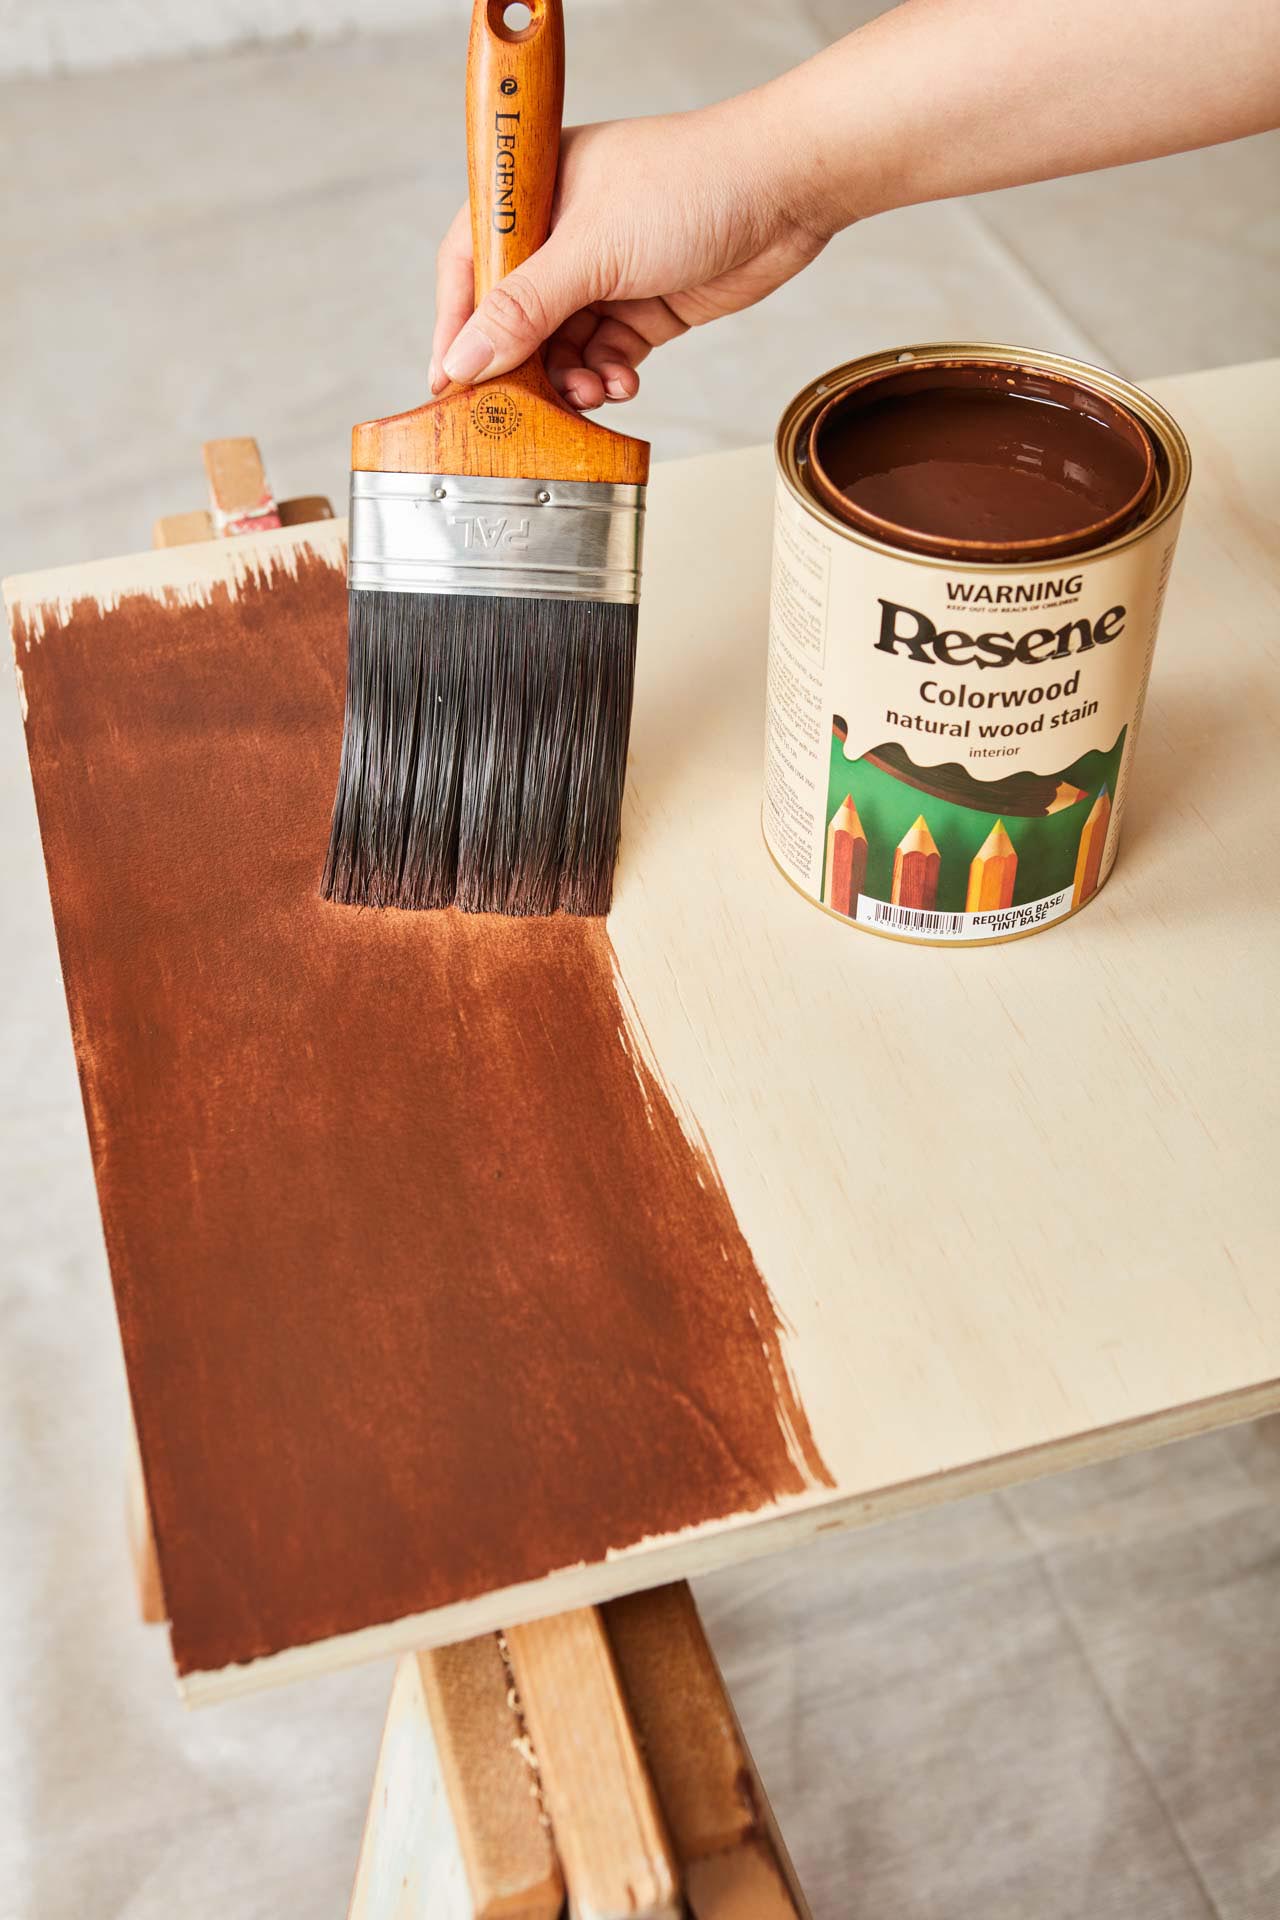 Paint brush staining sheet of ply wood with Resene natural wood stain